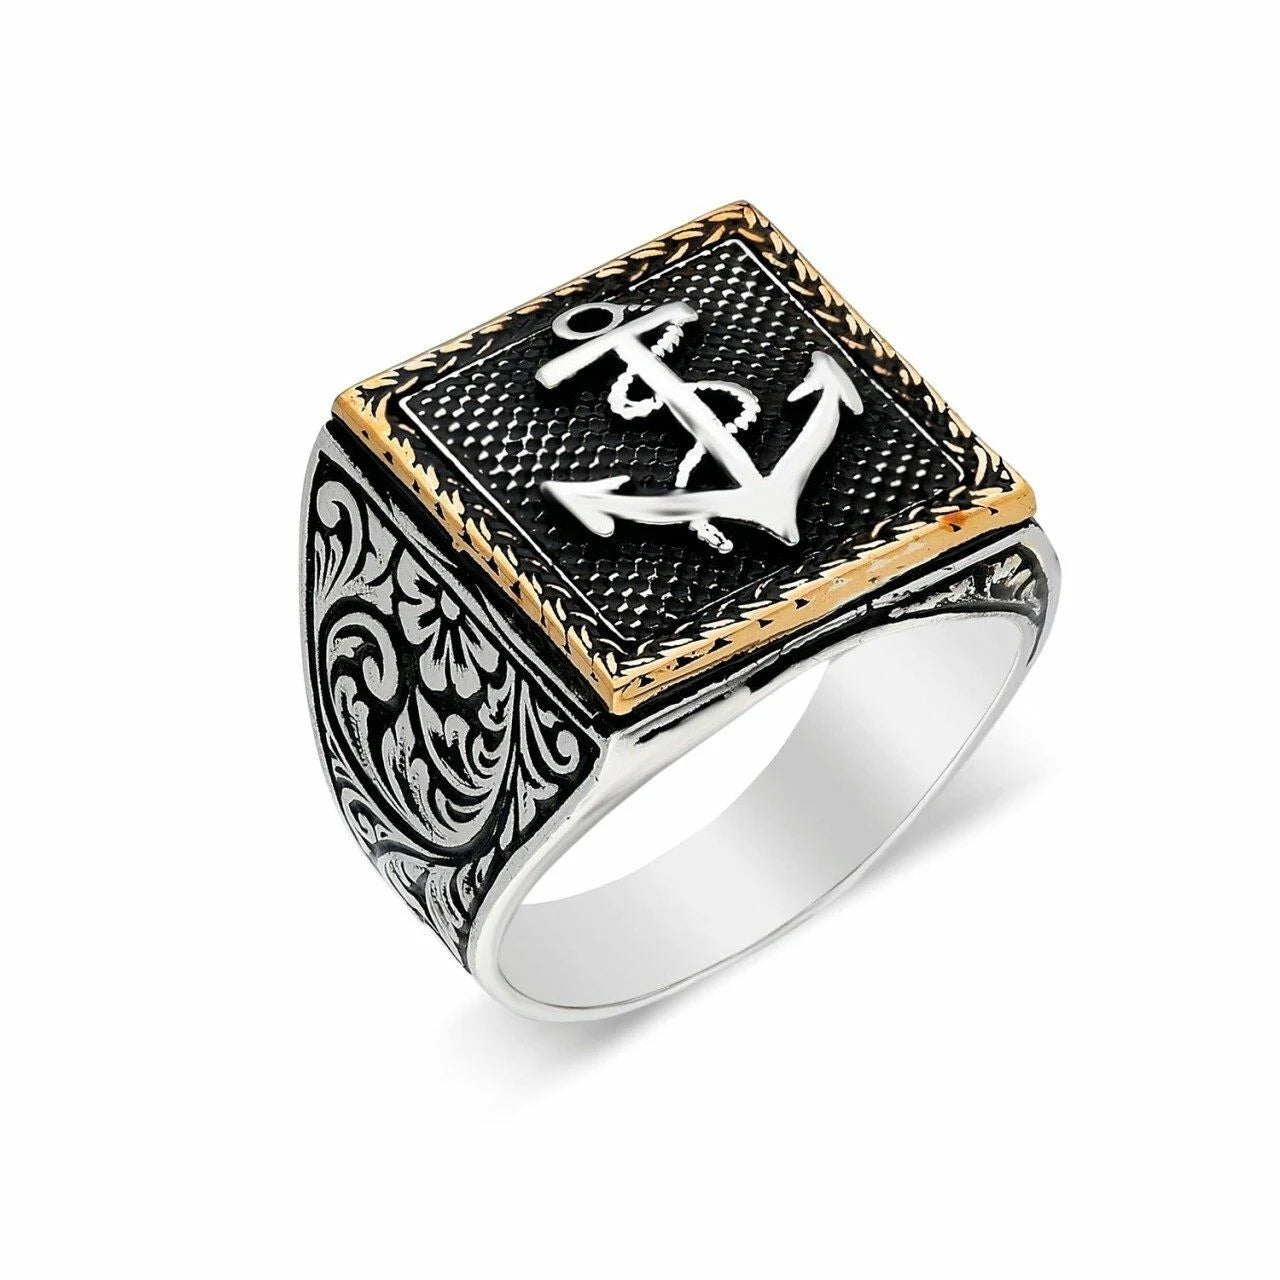 Anchor Ring - | Silver Sides 925 Engraved with Maritime Square Design OrlaSilver